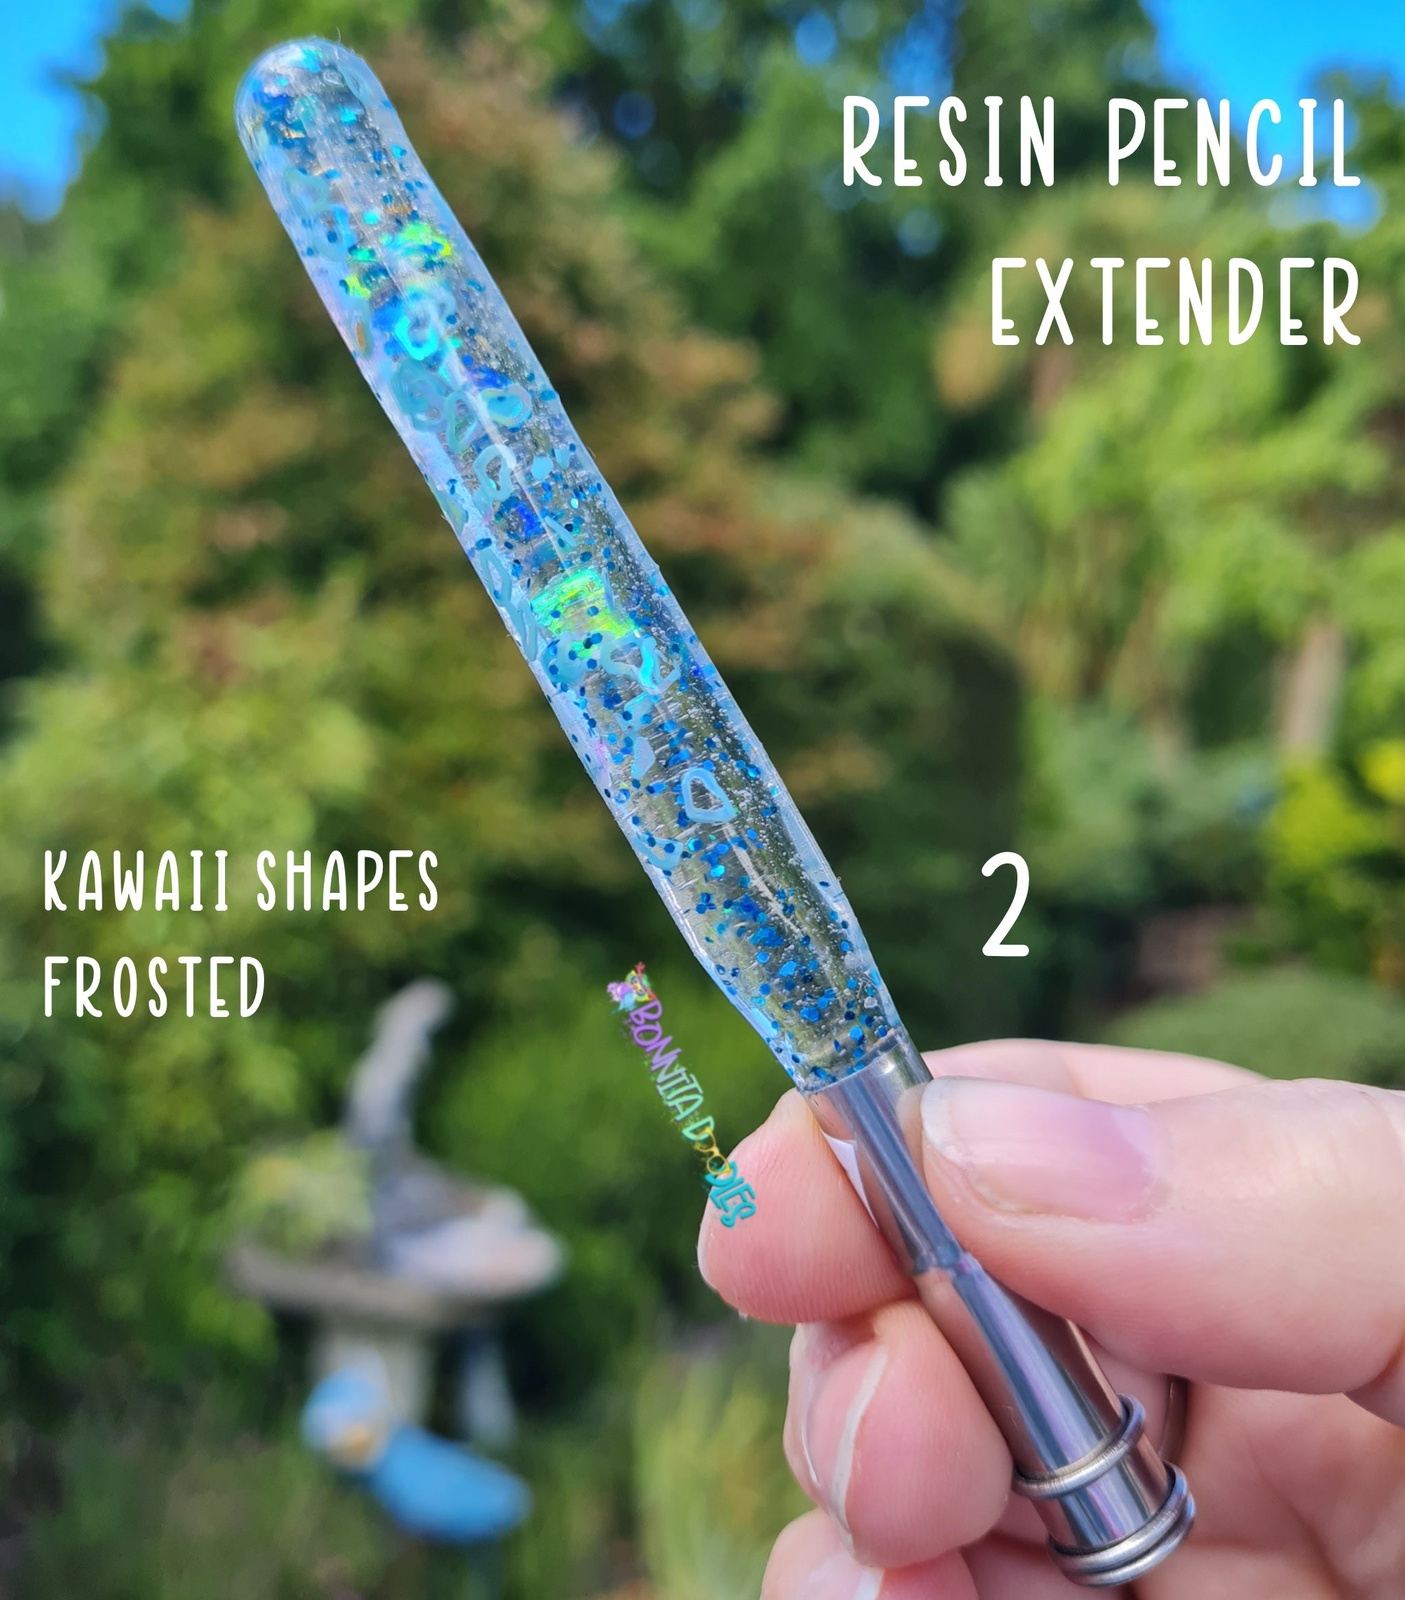 Resin pencil extender, handmade for artists, colourists and more